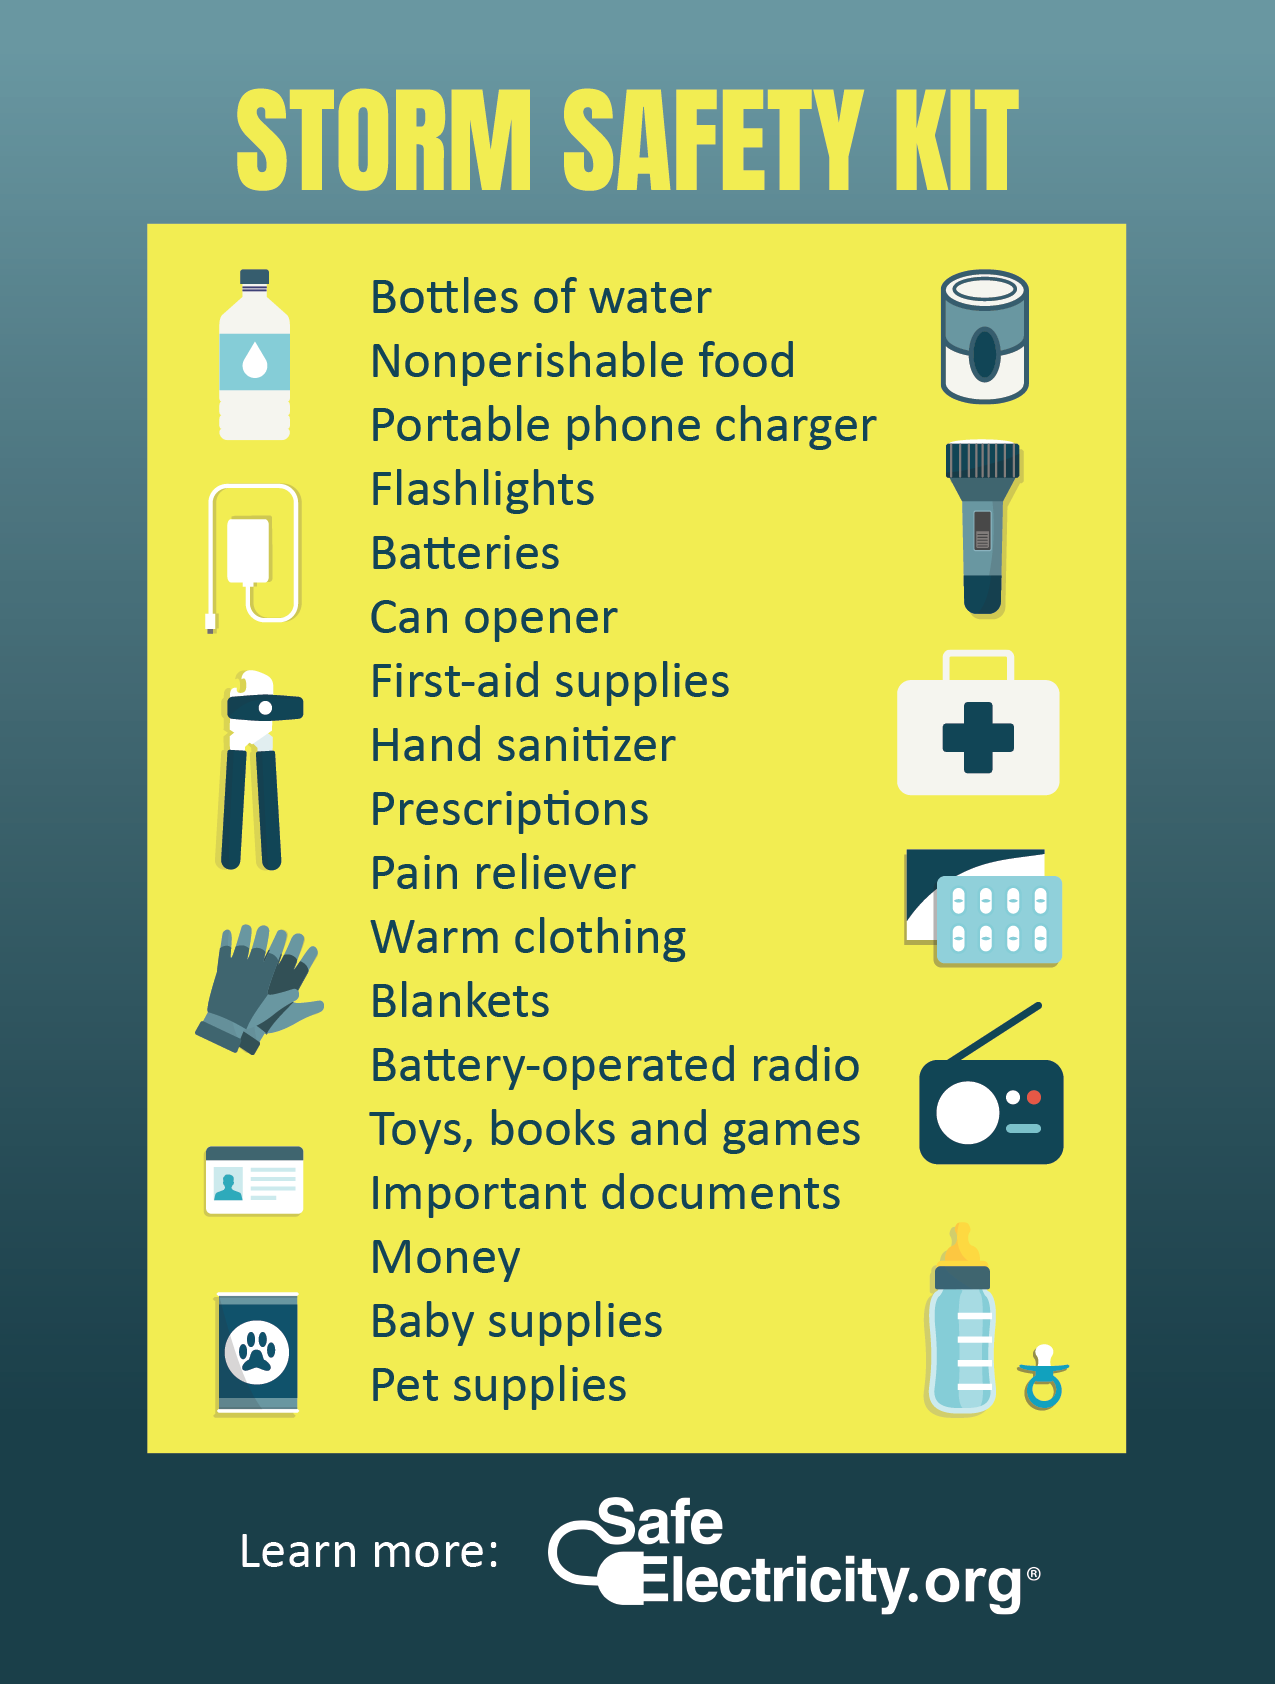 Power Outage Checklist